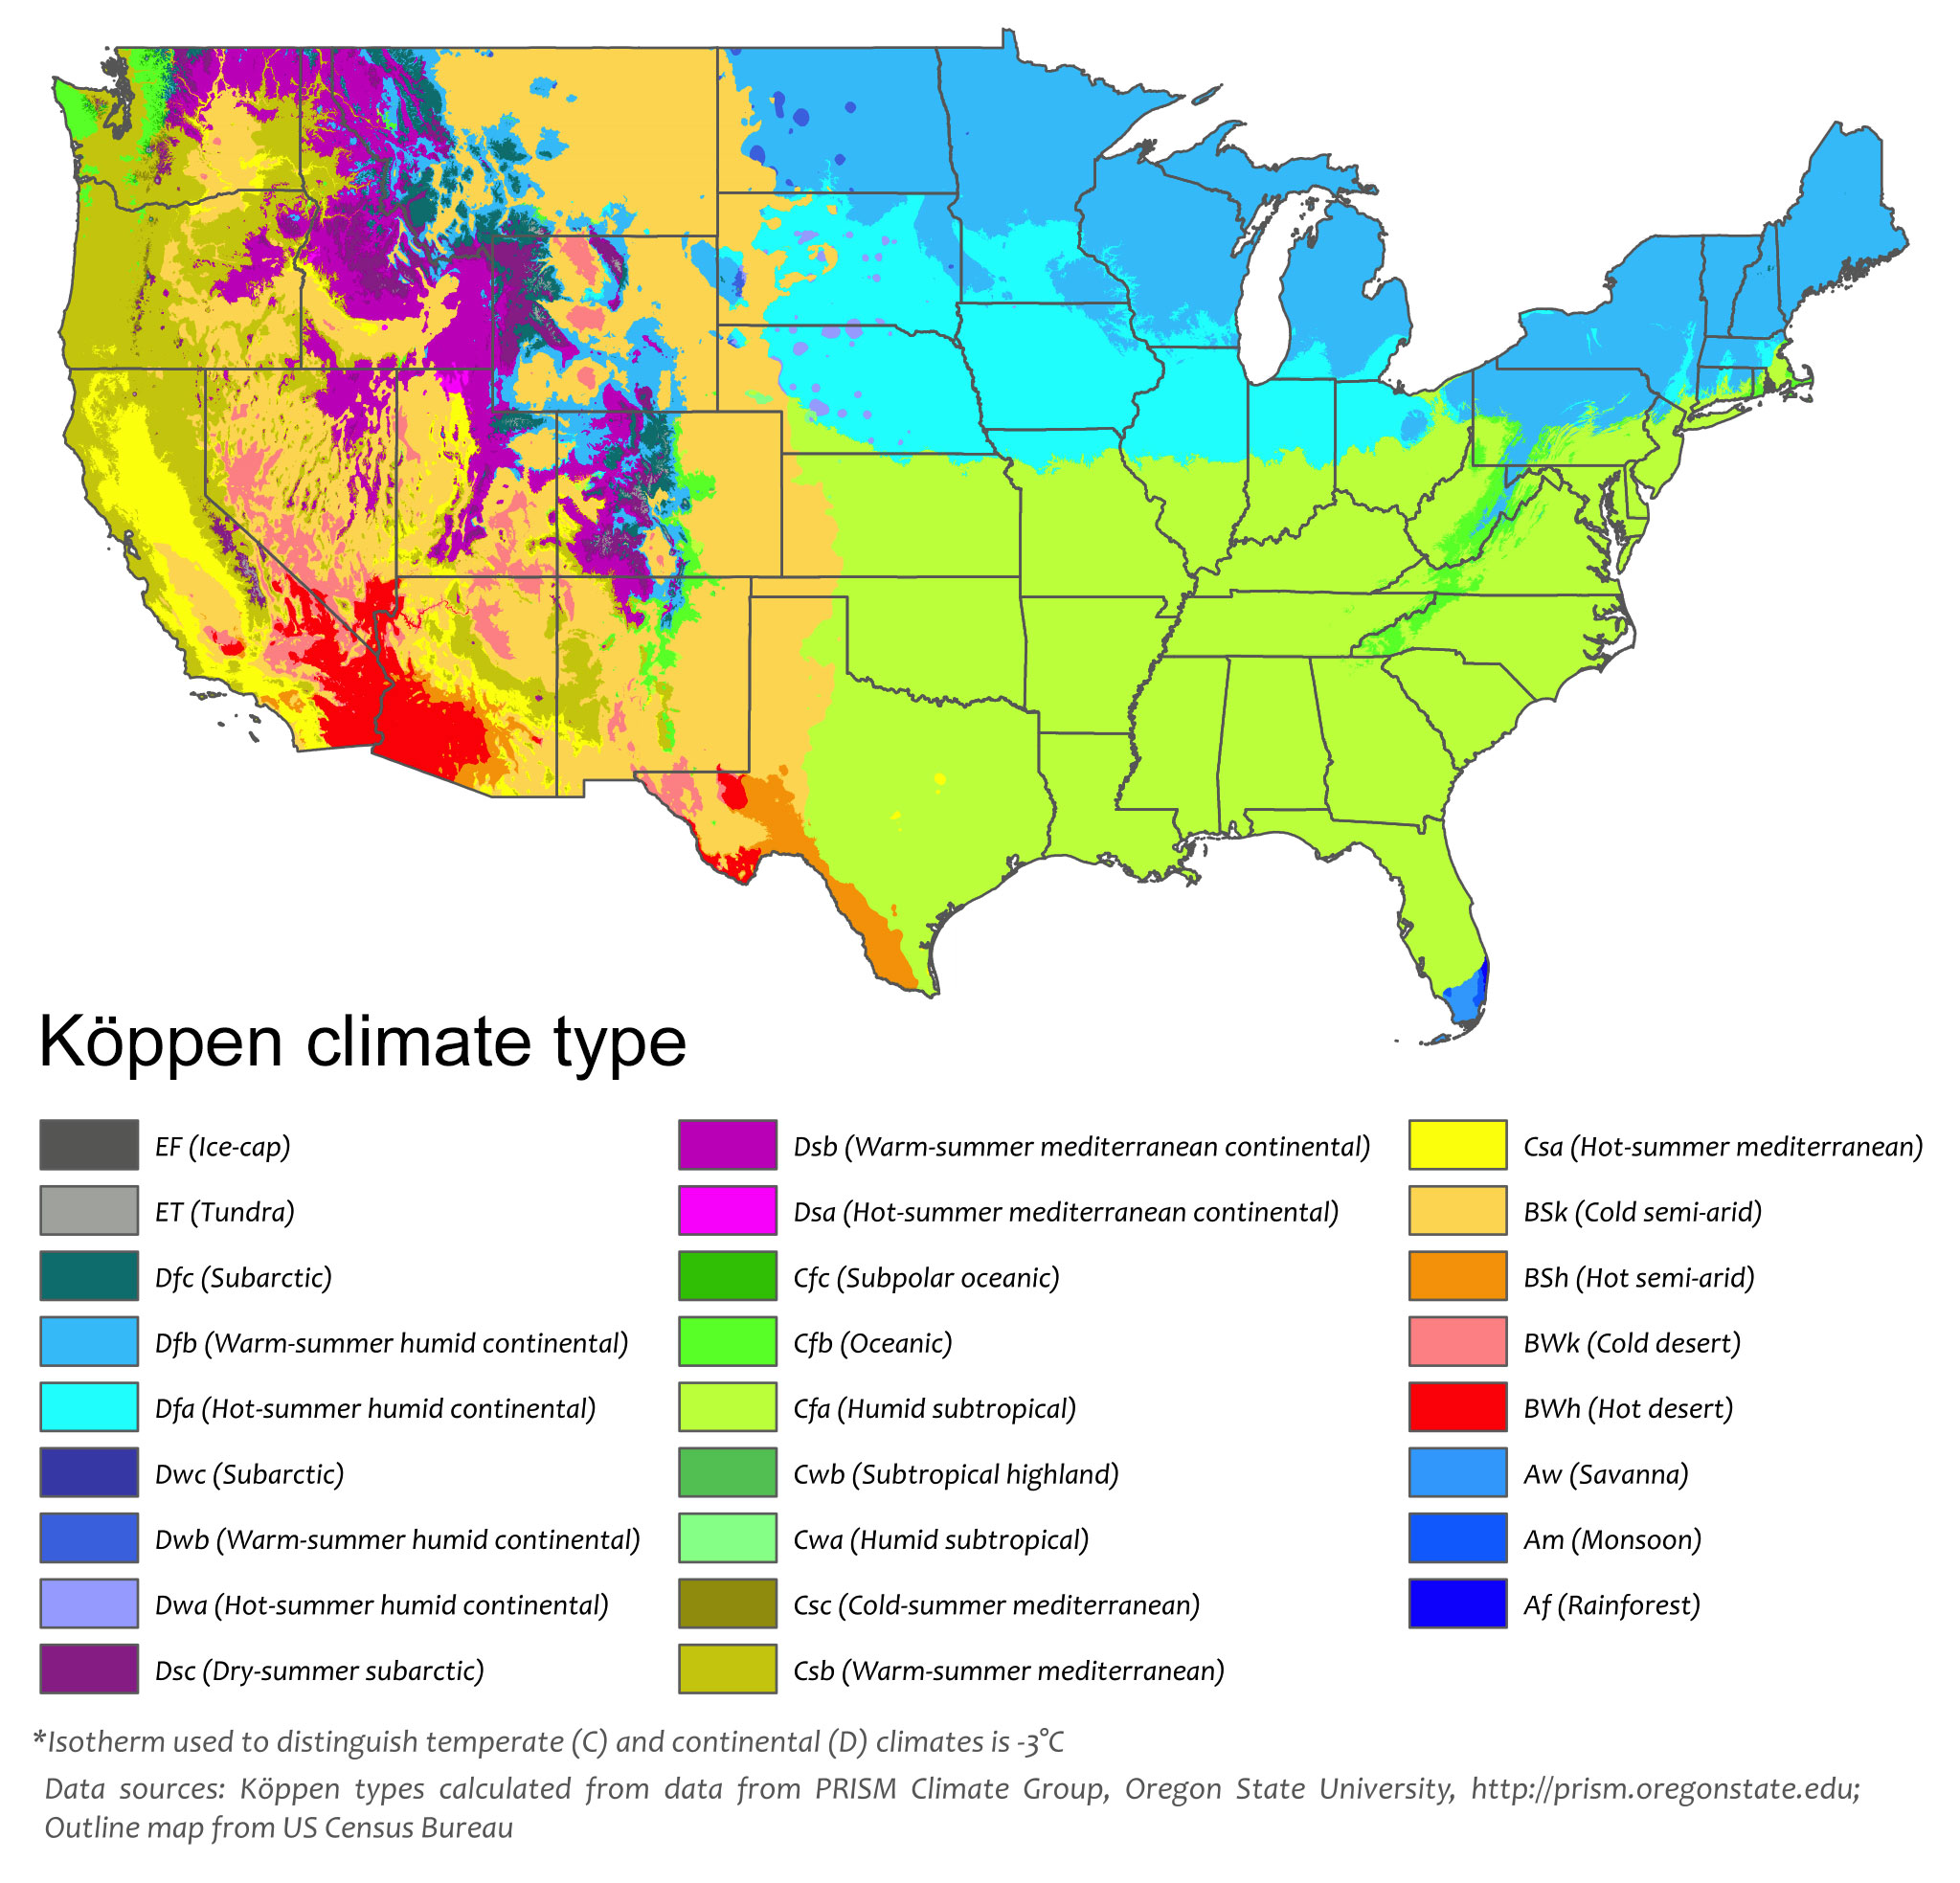 Detailed Koppen climate map of the continental United States.